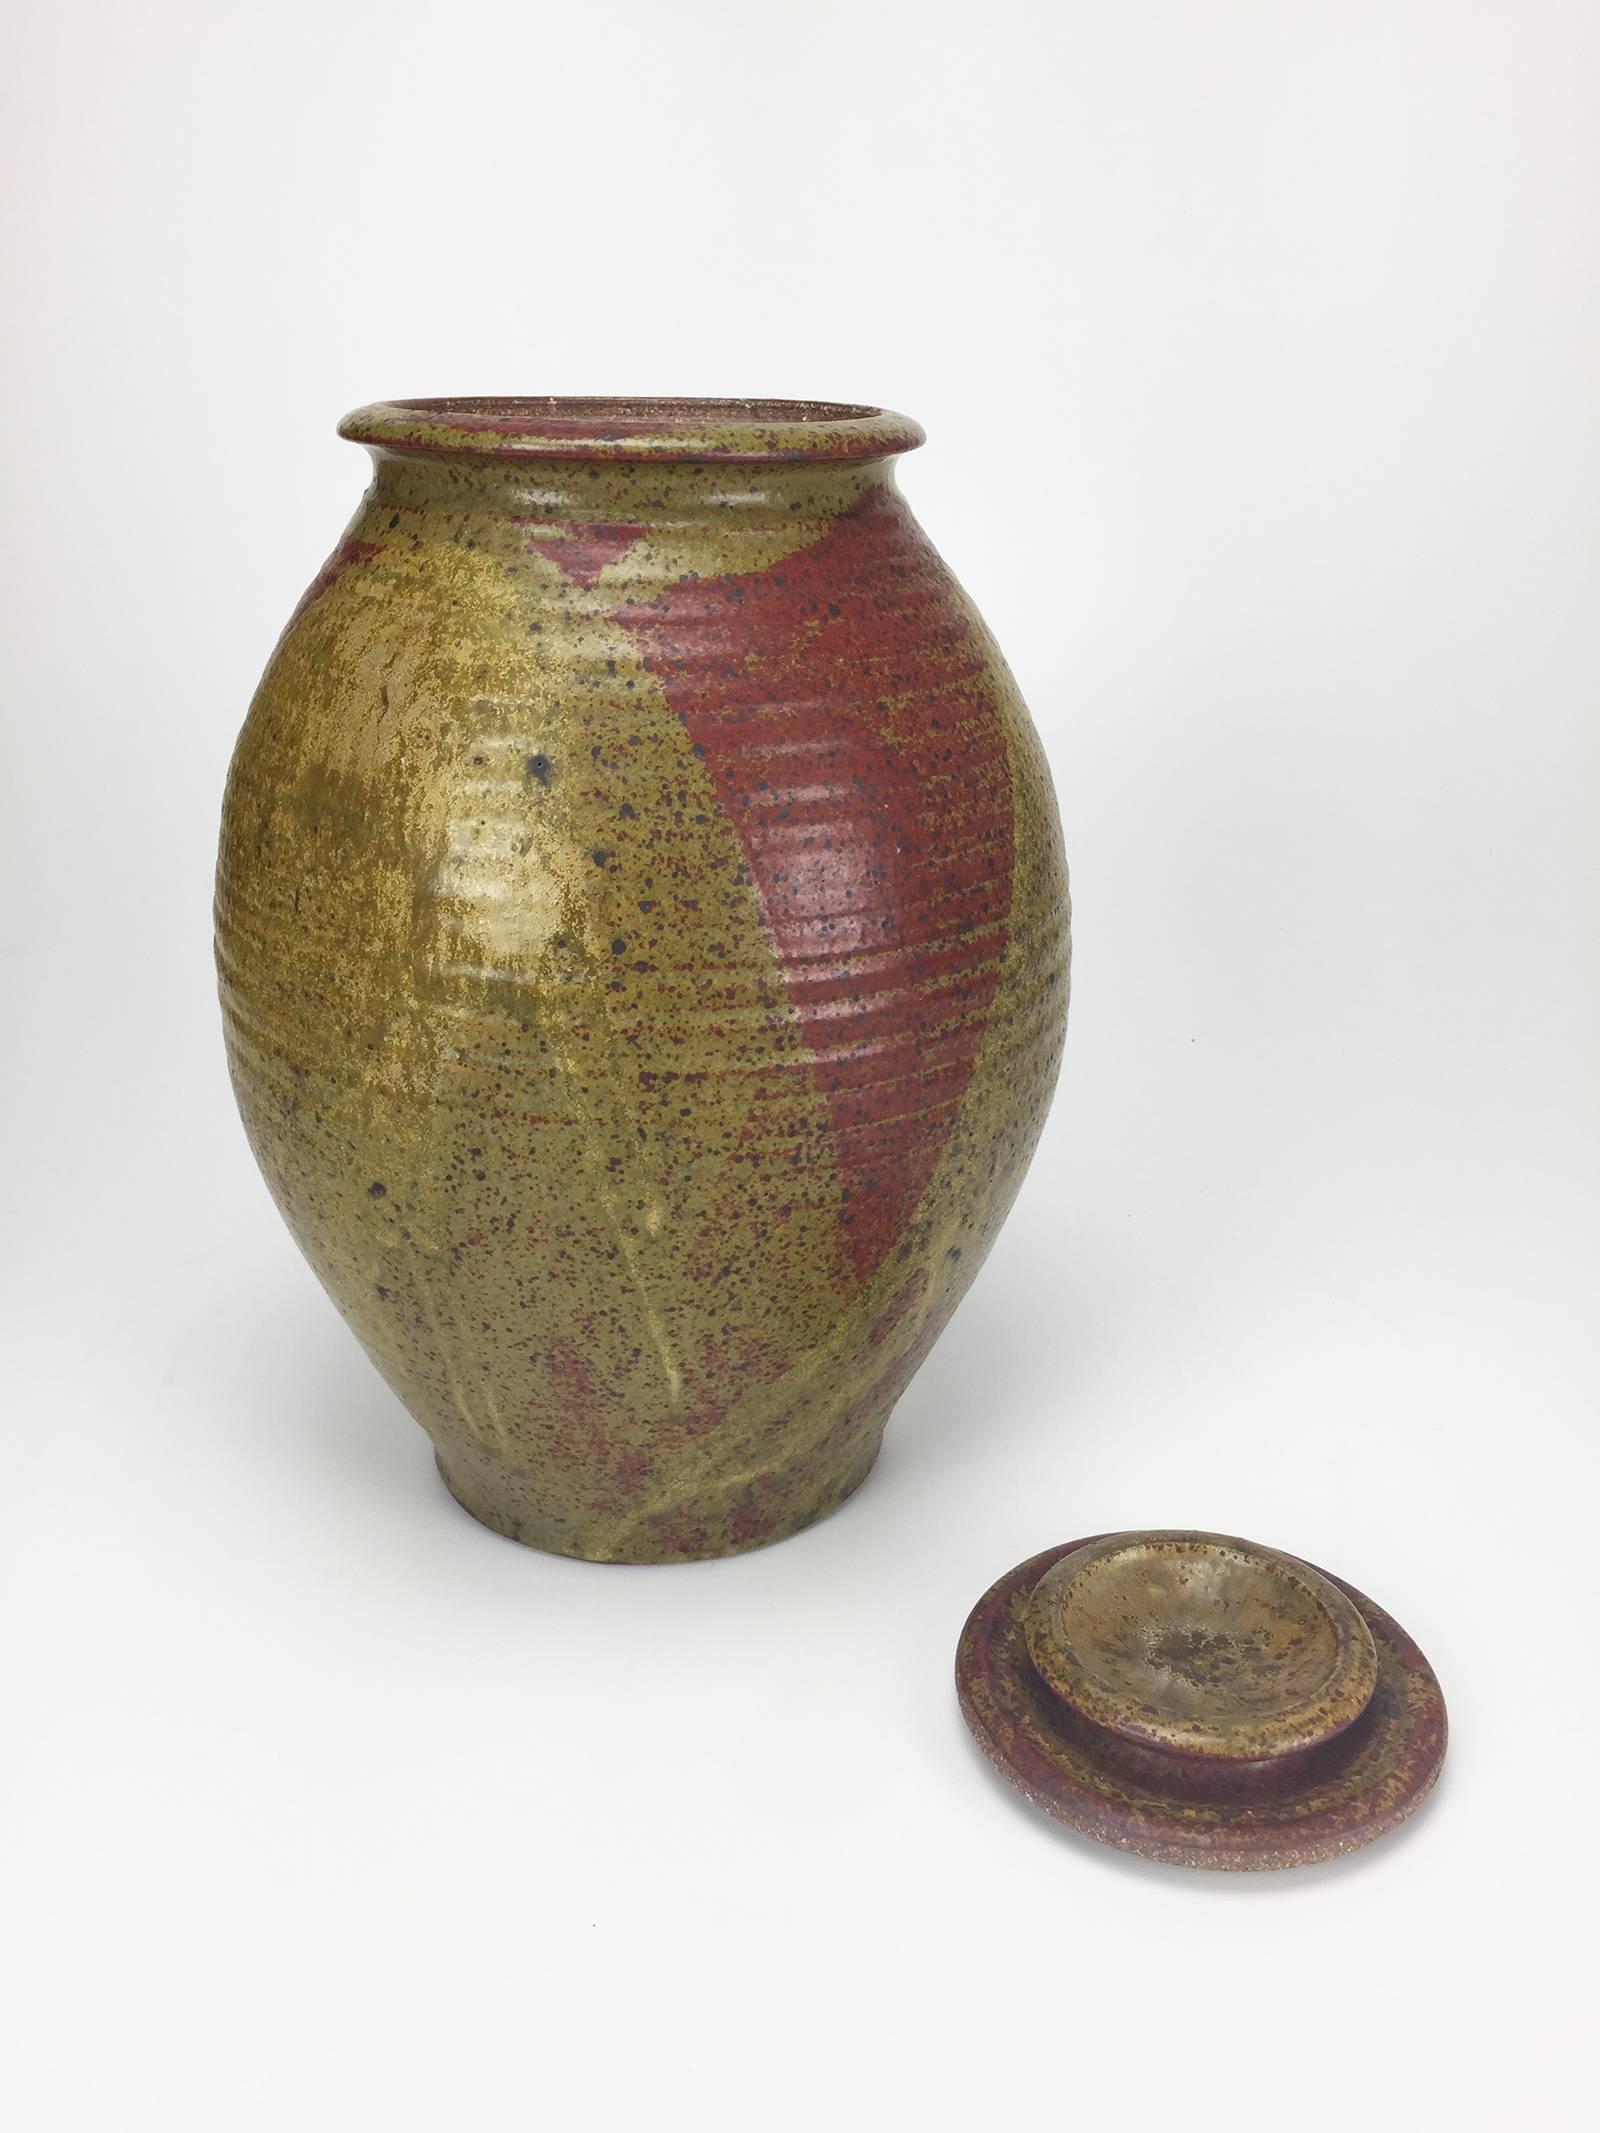 Oversize lidded stoneware jar with red detailing and Robin's Egg blue interior. Produced at the Archie Bray Foundation in Helena, Montana while Ken Ferguson was director; his influence is clearly seen in this piece. Underside stamped with